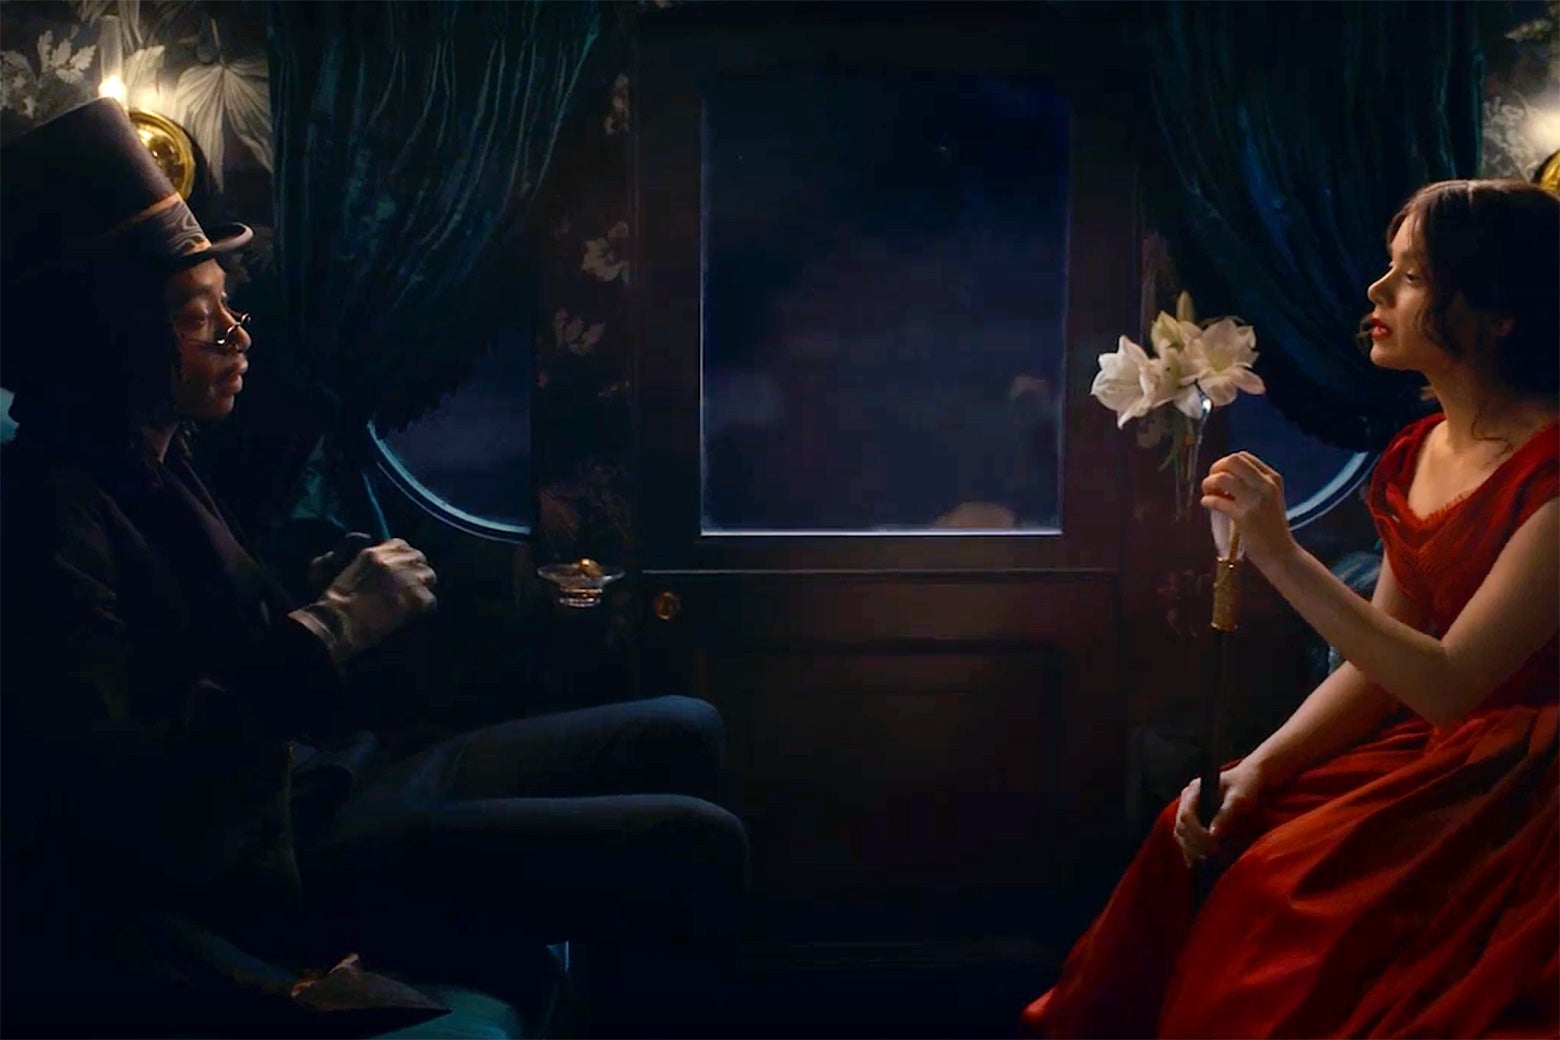 Wiz Khalifa as Death and Hailee Steinfeld as Emily Dickinson sitting across from each other in a carriage.